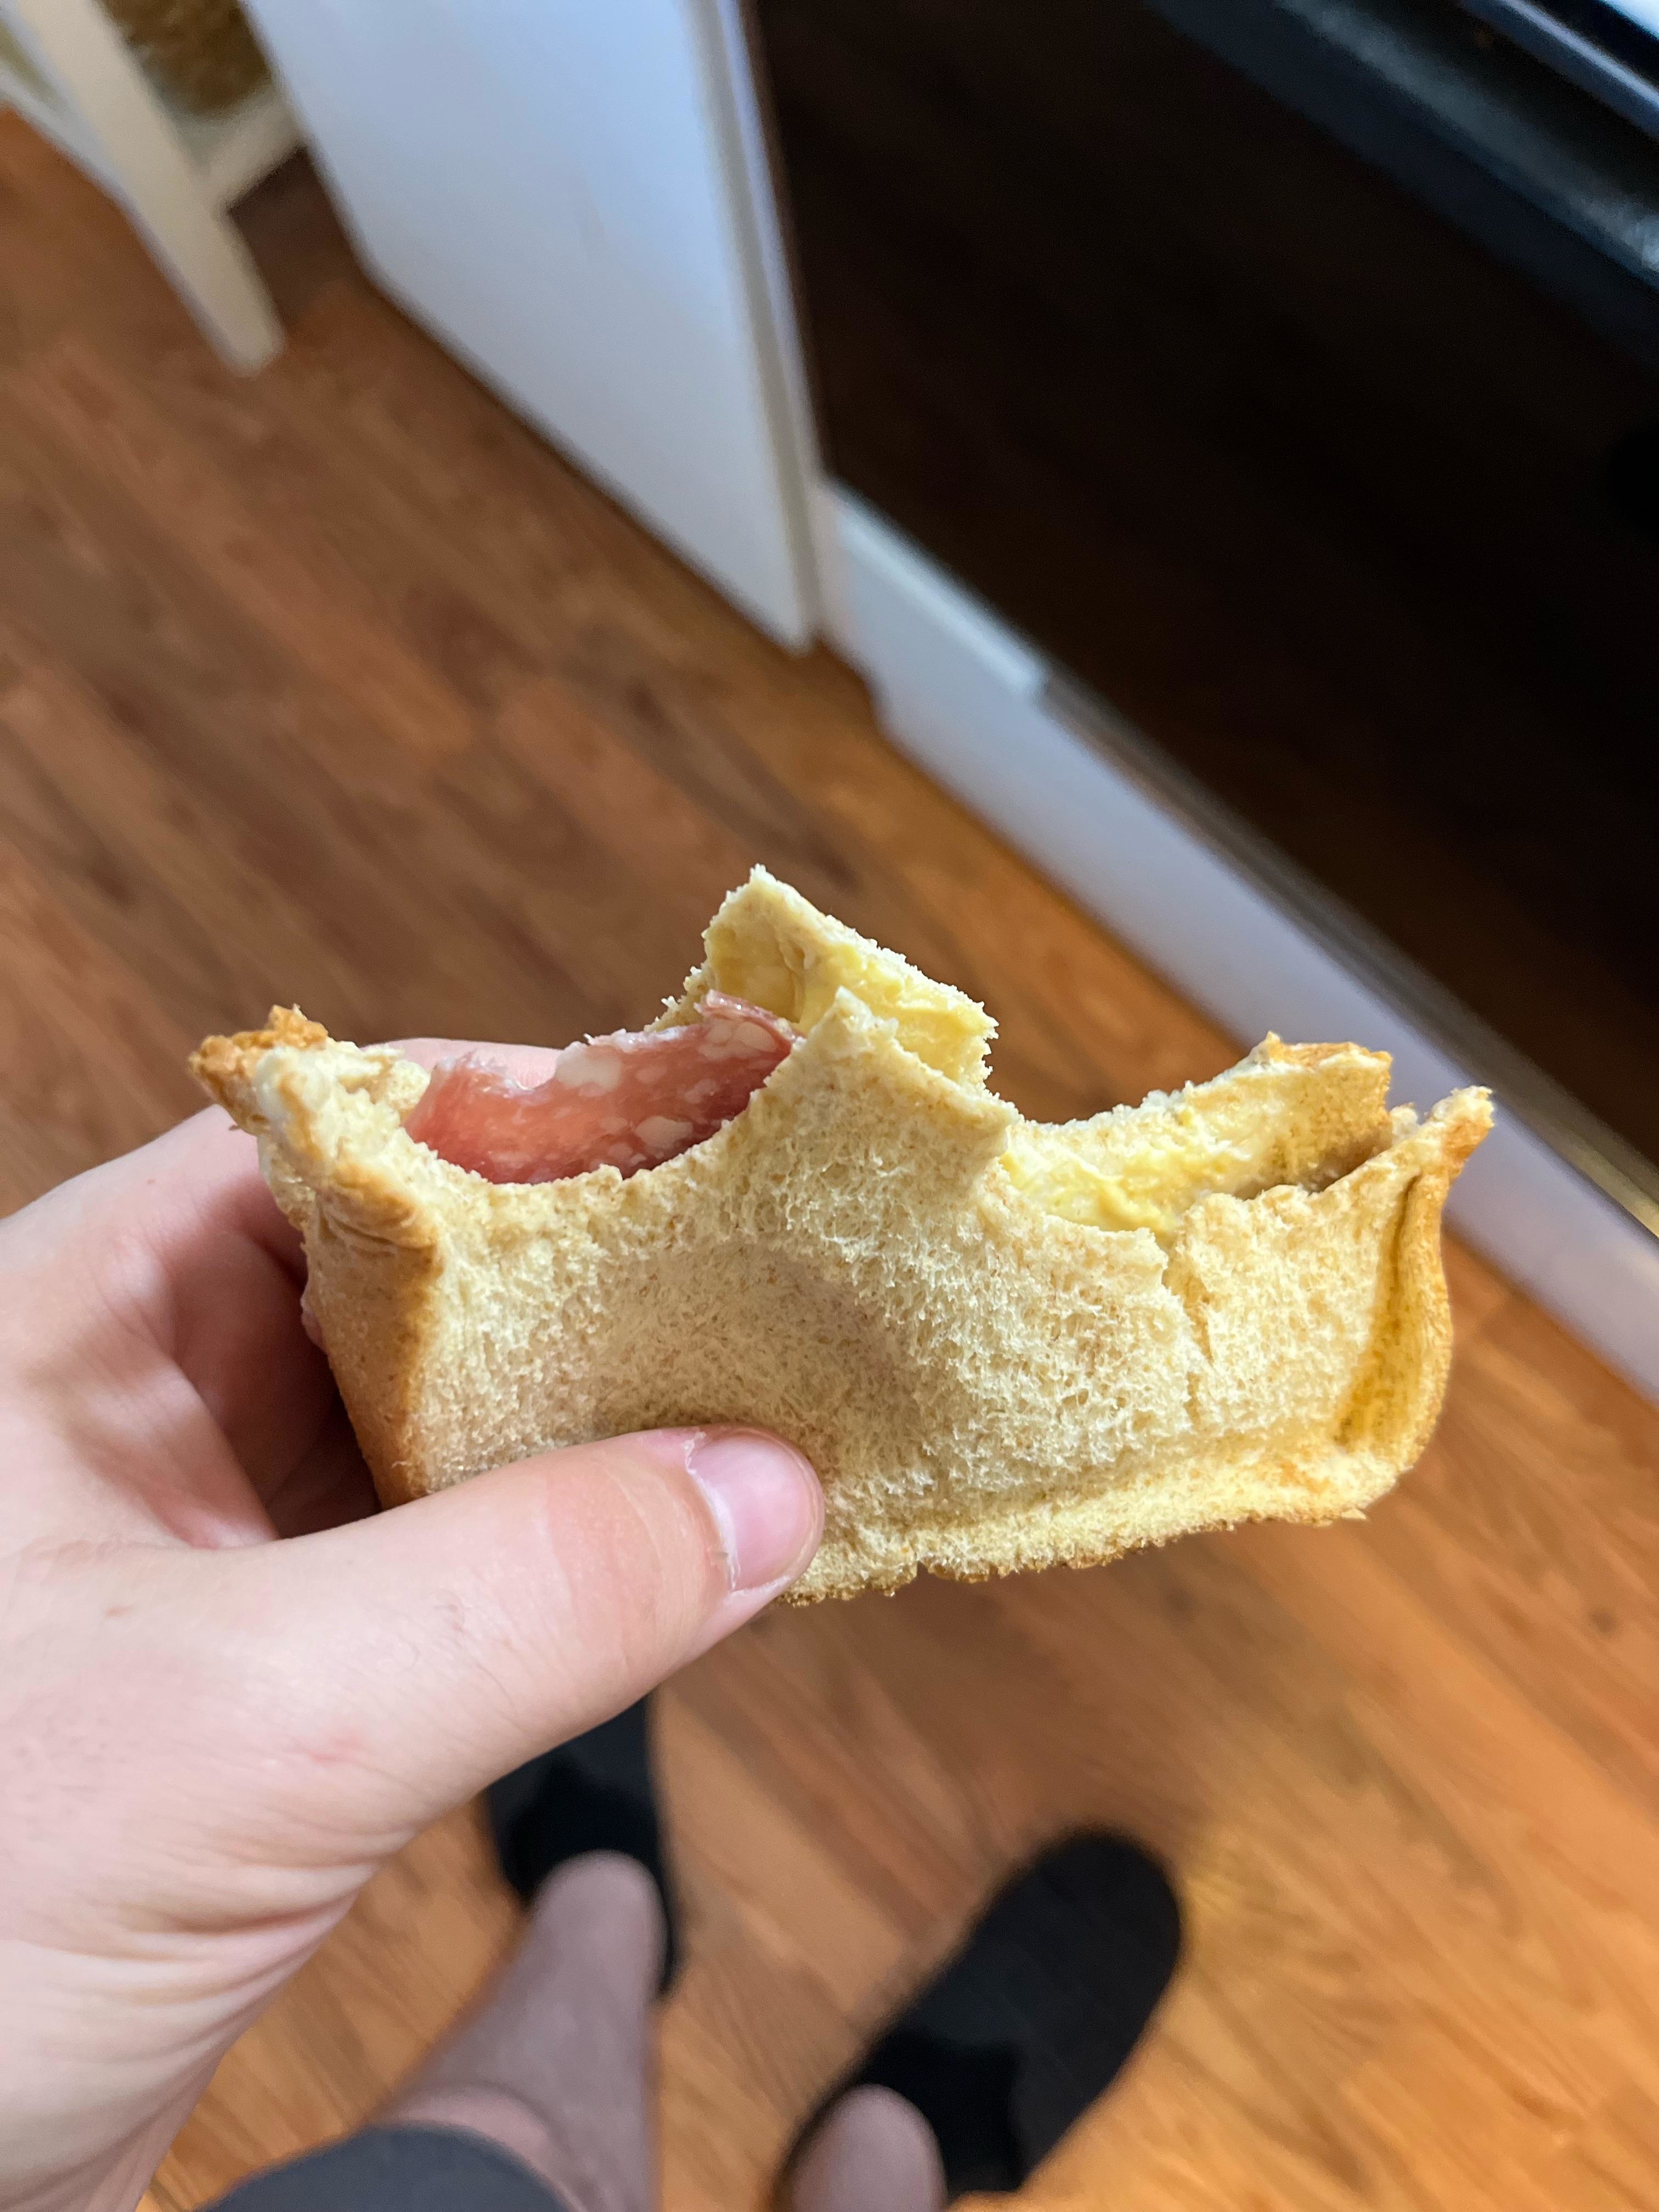 Person holding a bitten sandwich with visible sausage filling